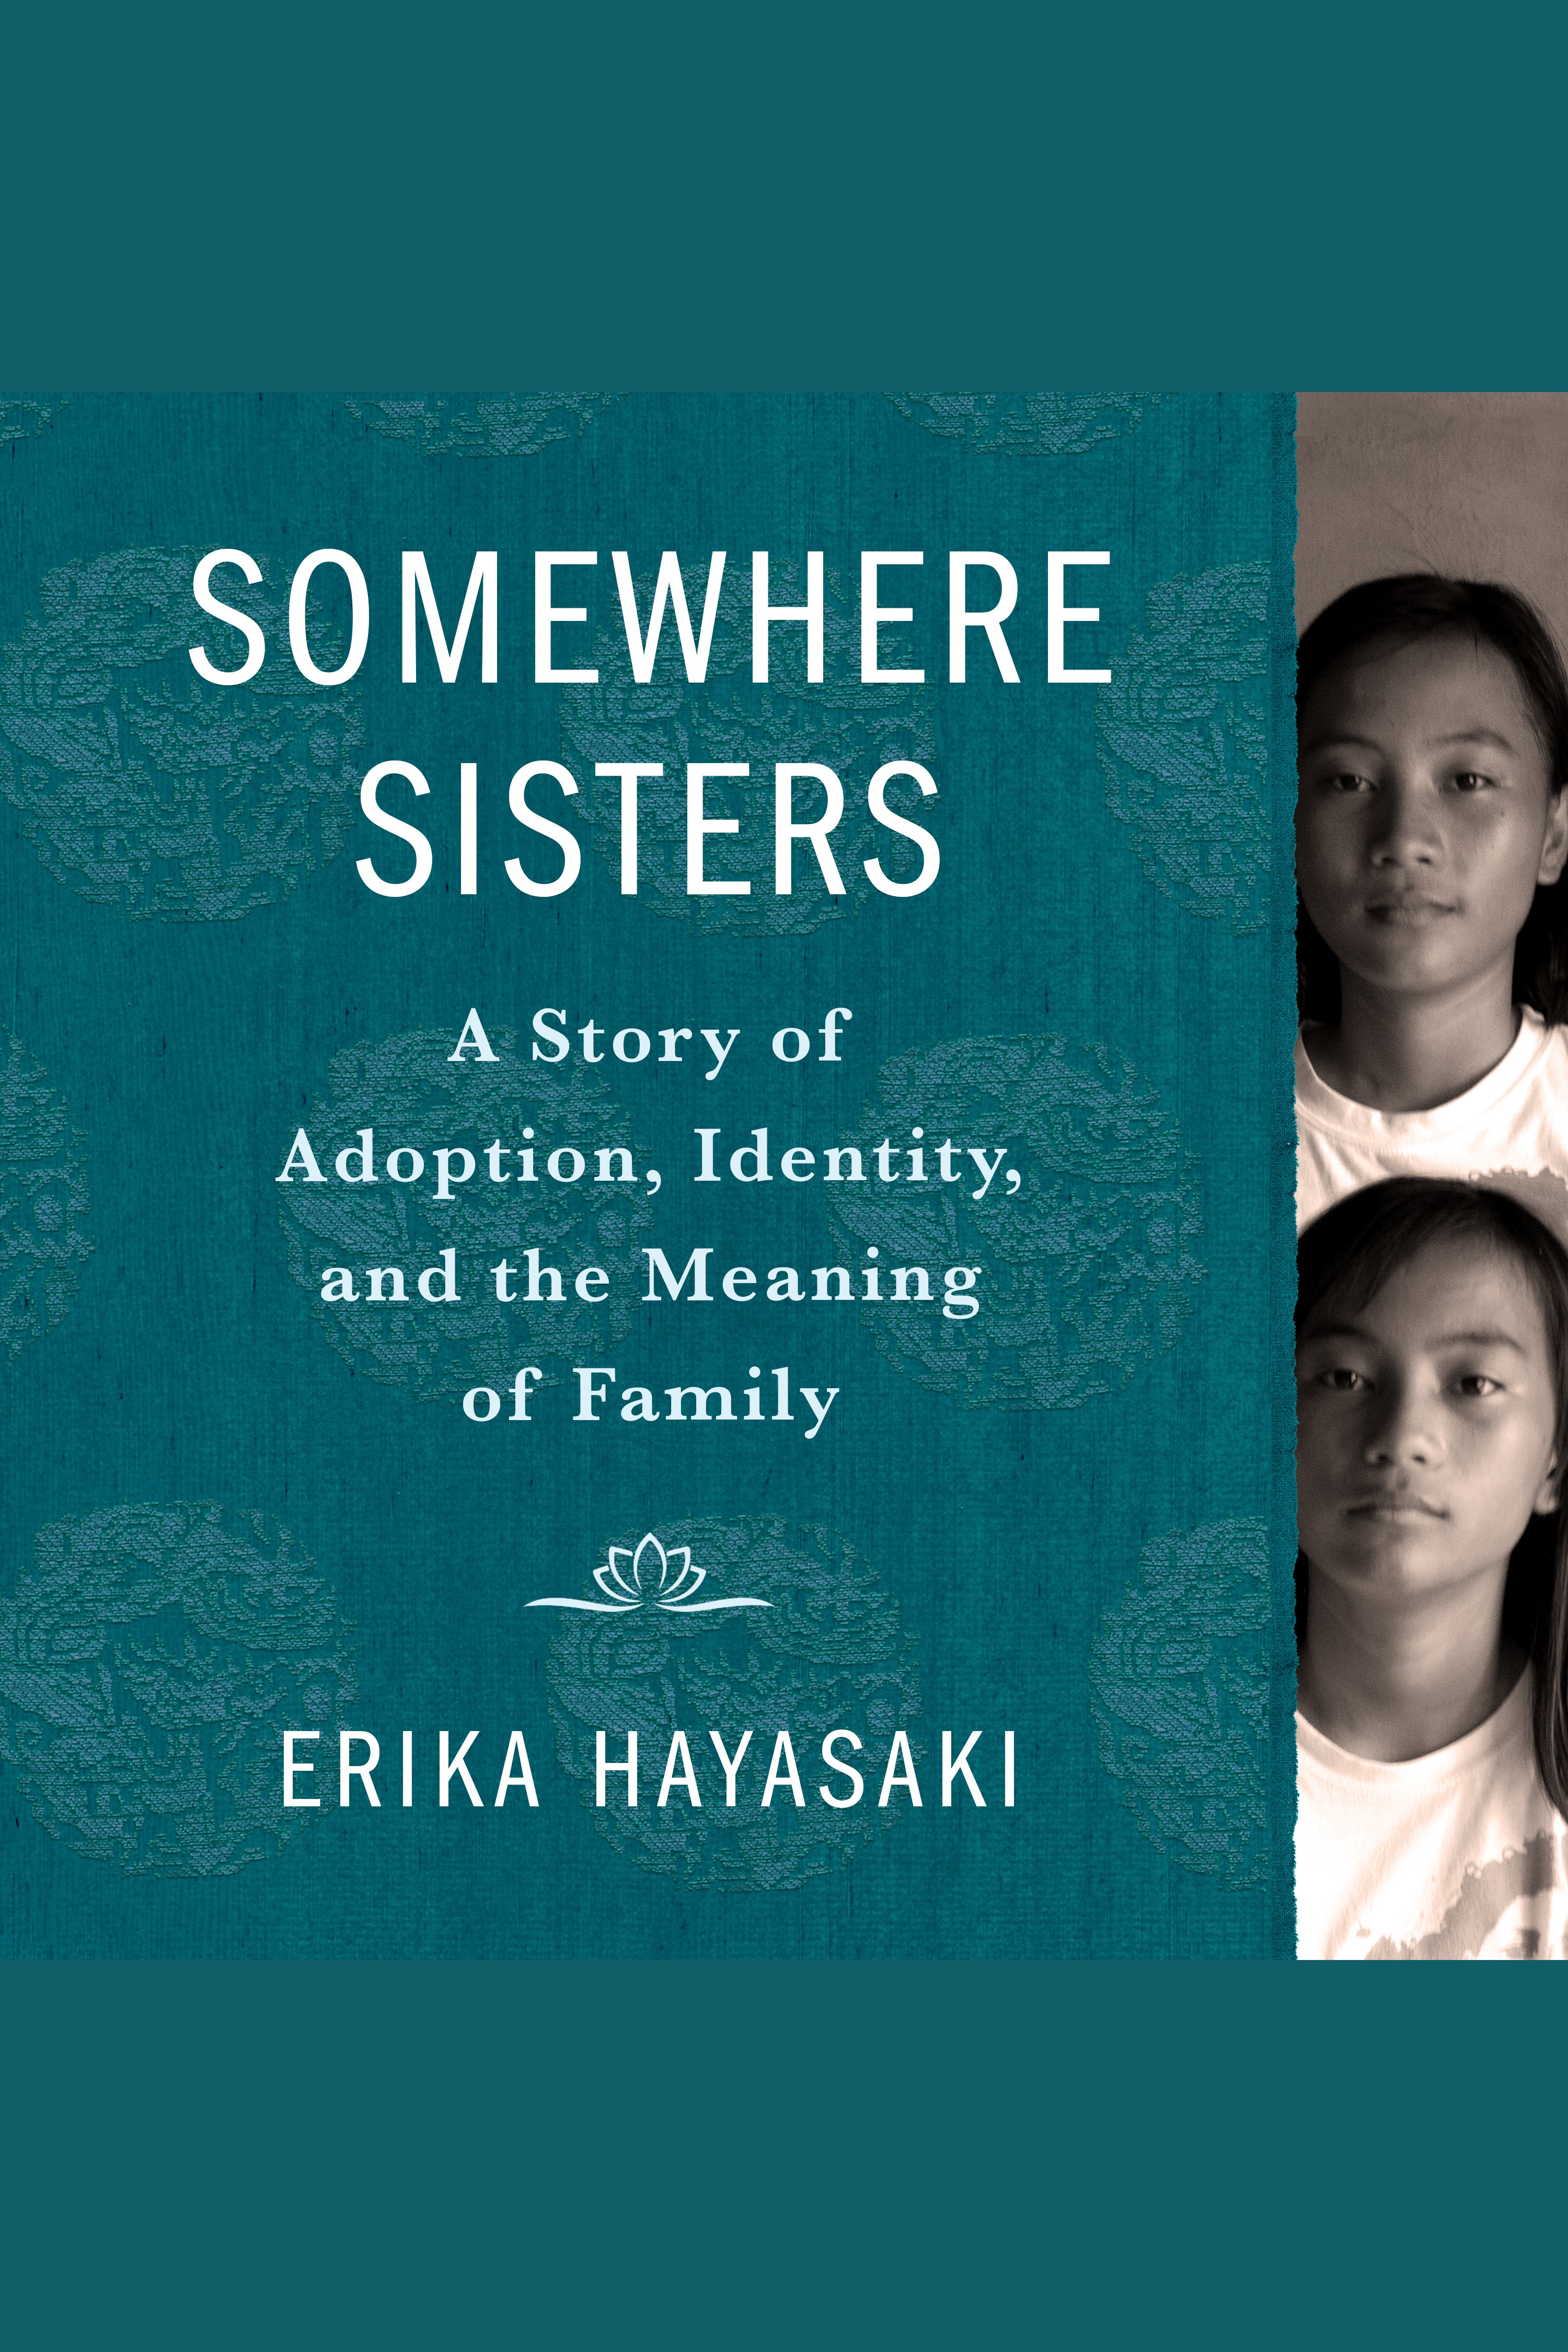 Somewhere Sisters A Story of Adoption, Identity, and the Meaning of Family cover image